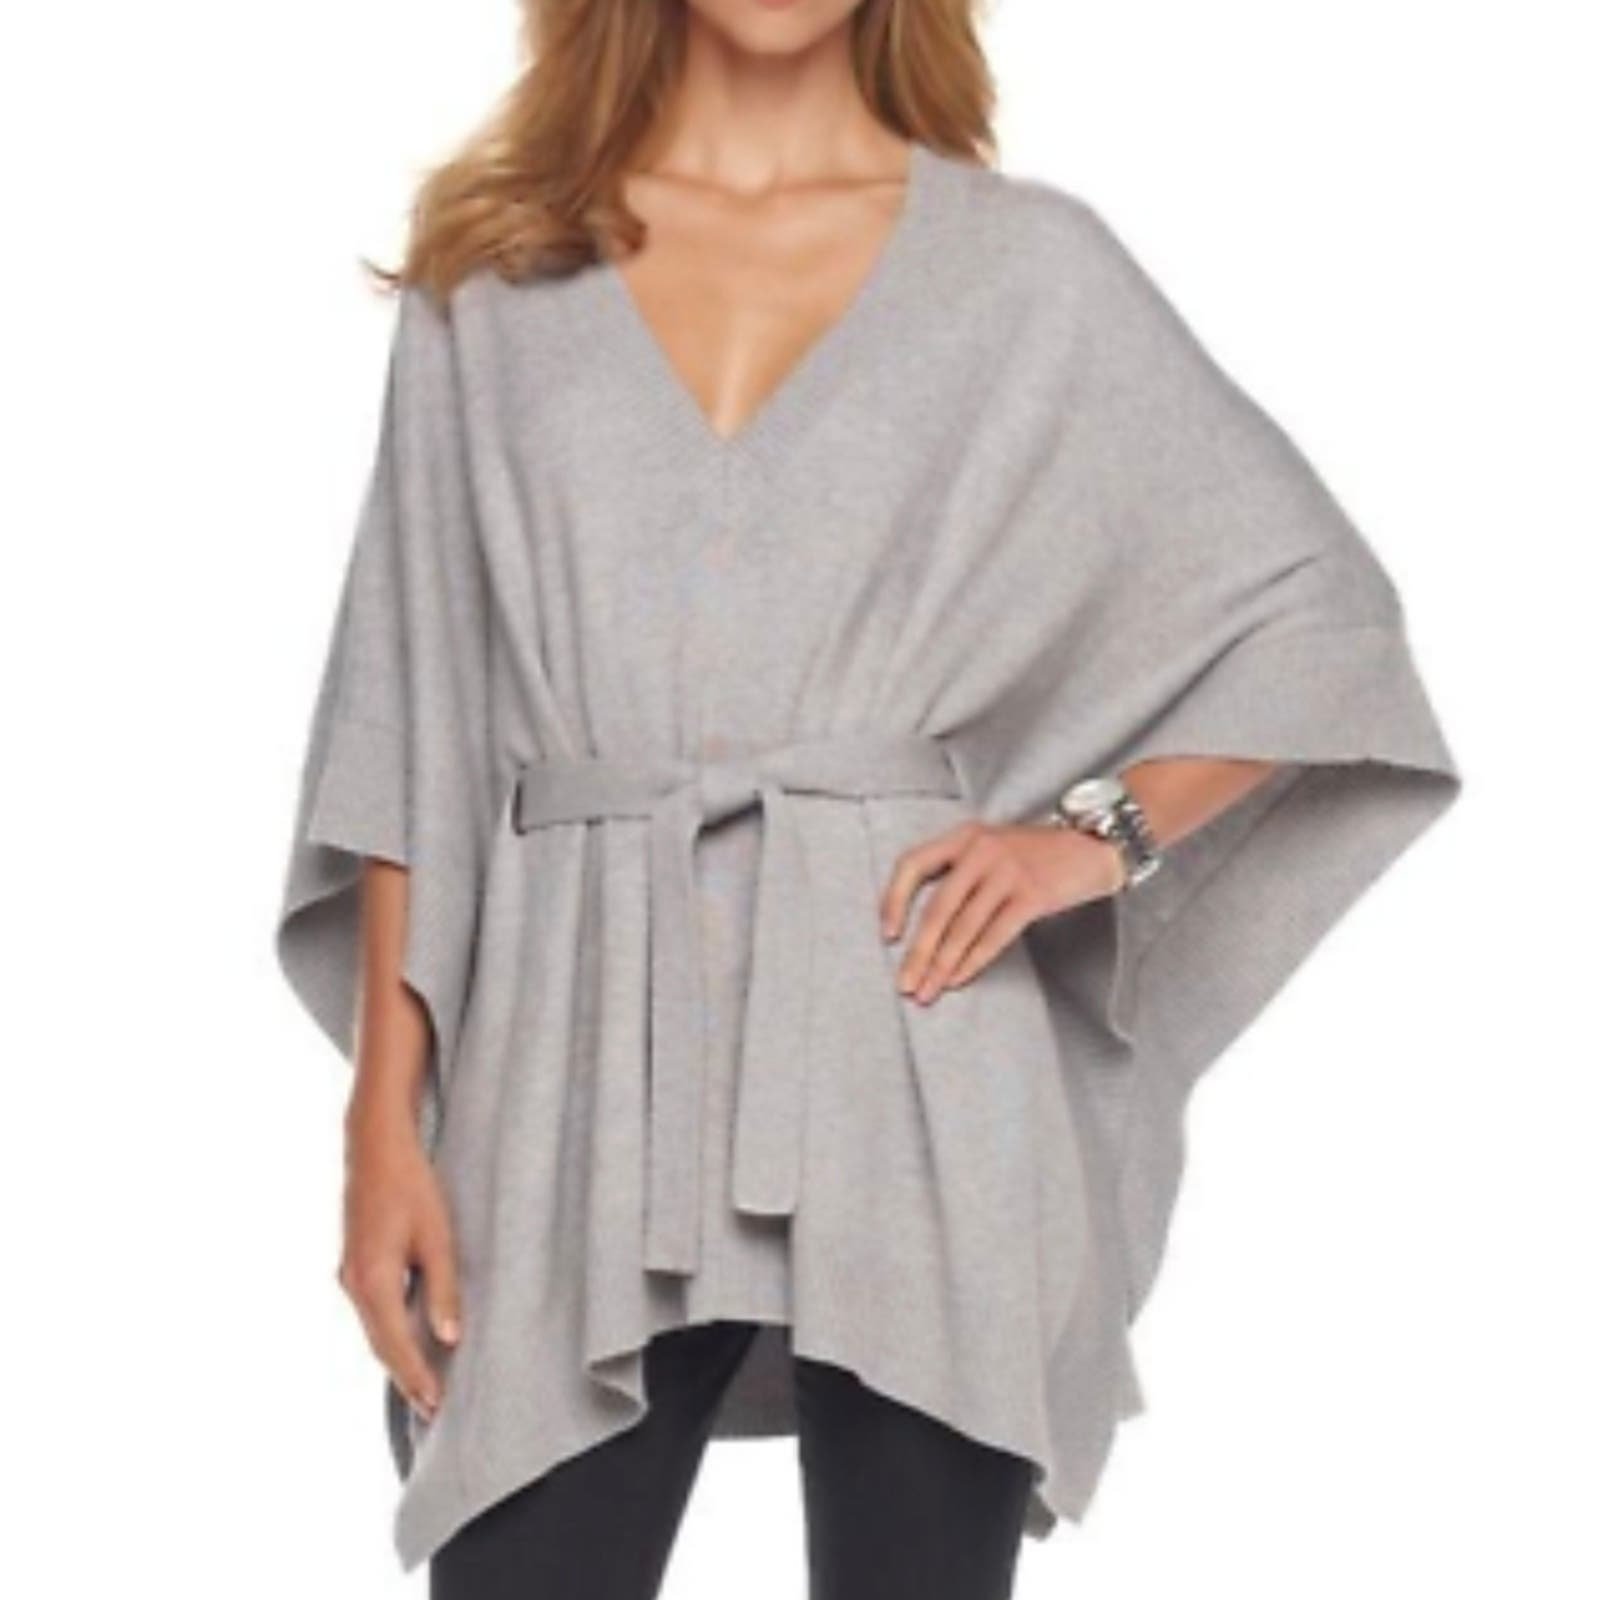 Gorgeous Michael Kors Poncho Sweater - Small GhKSLTLQn Discount